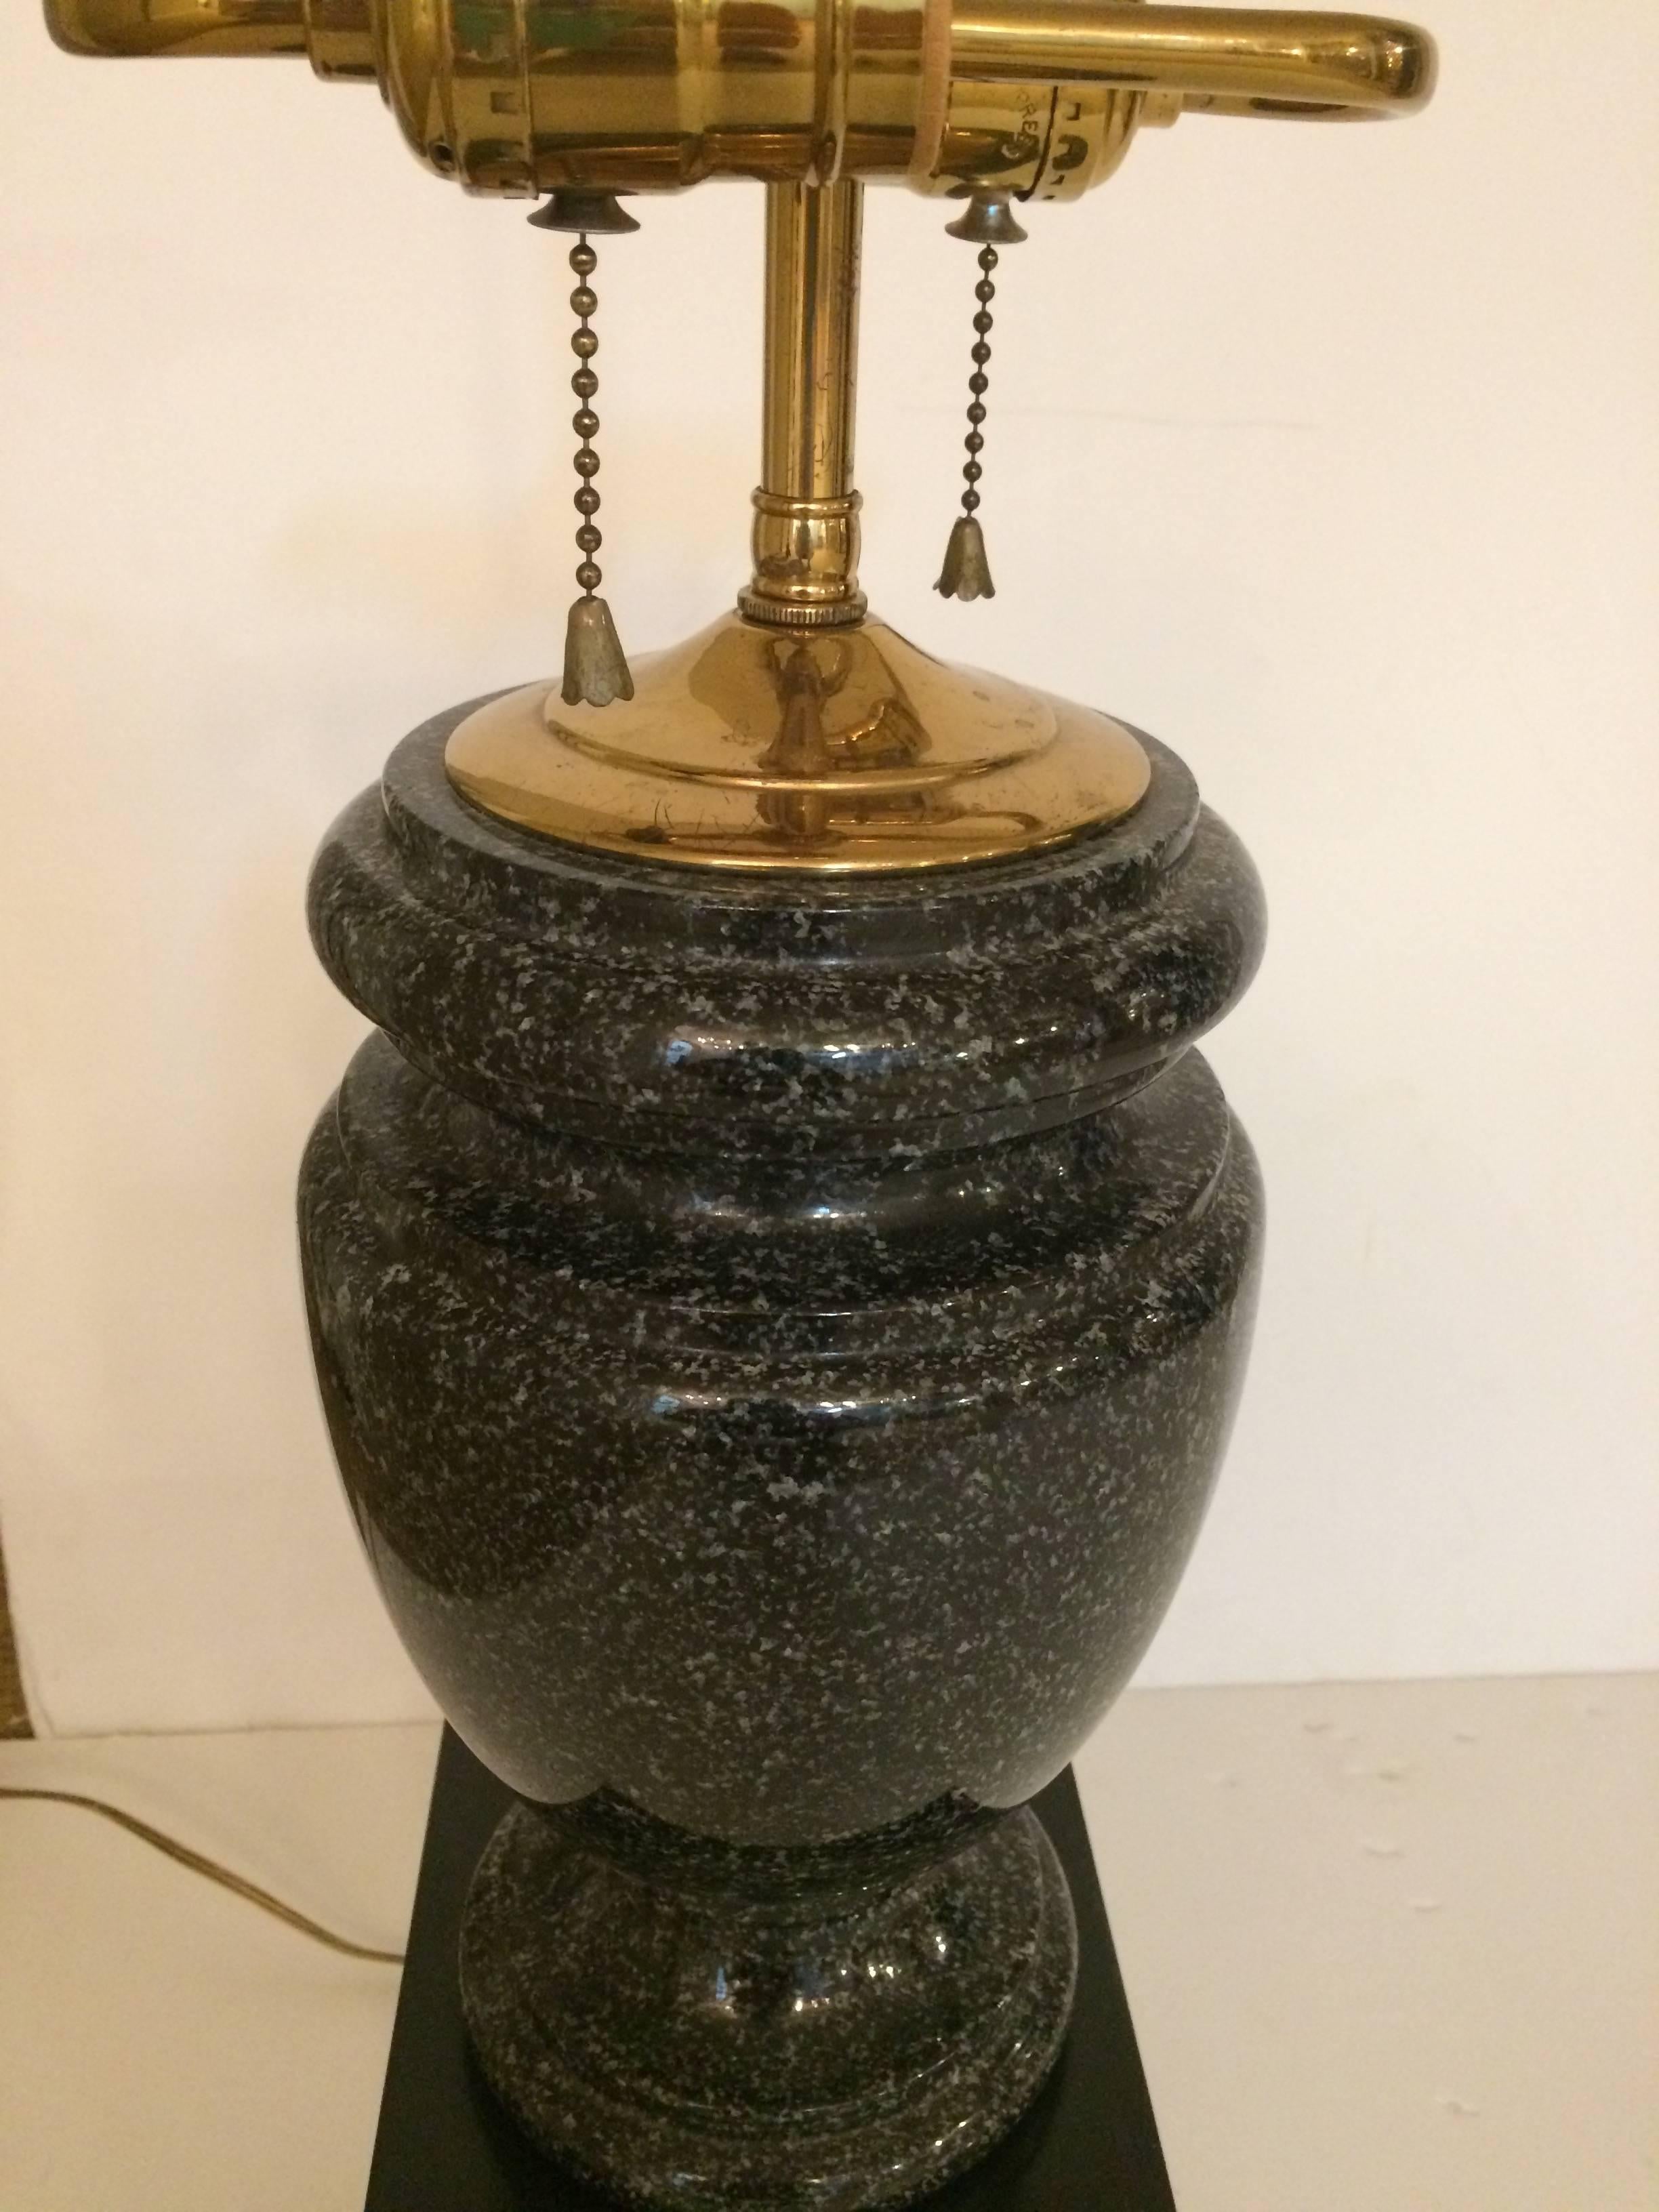 Two very substantial heavy masculine lamps having classic urn shaped bases in black granite that rest on black lacquer plinths. Brass double sockets and finial.